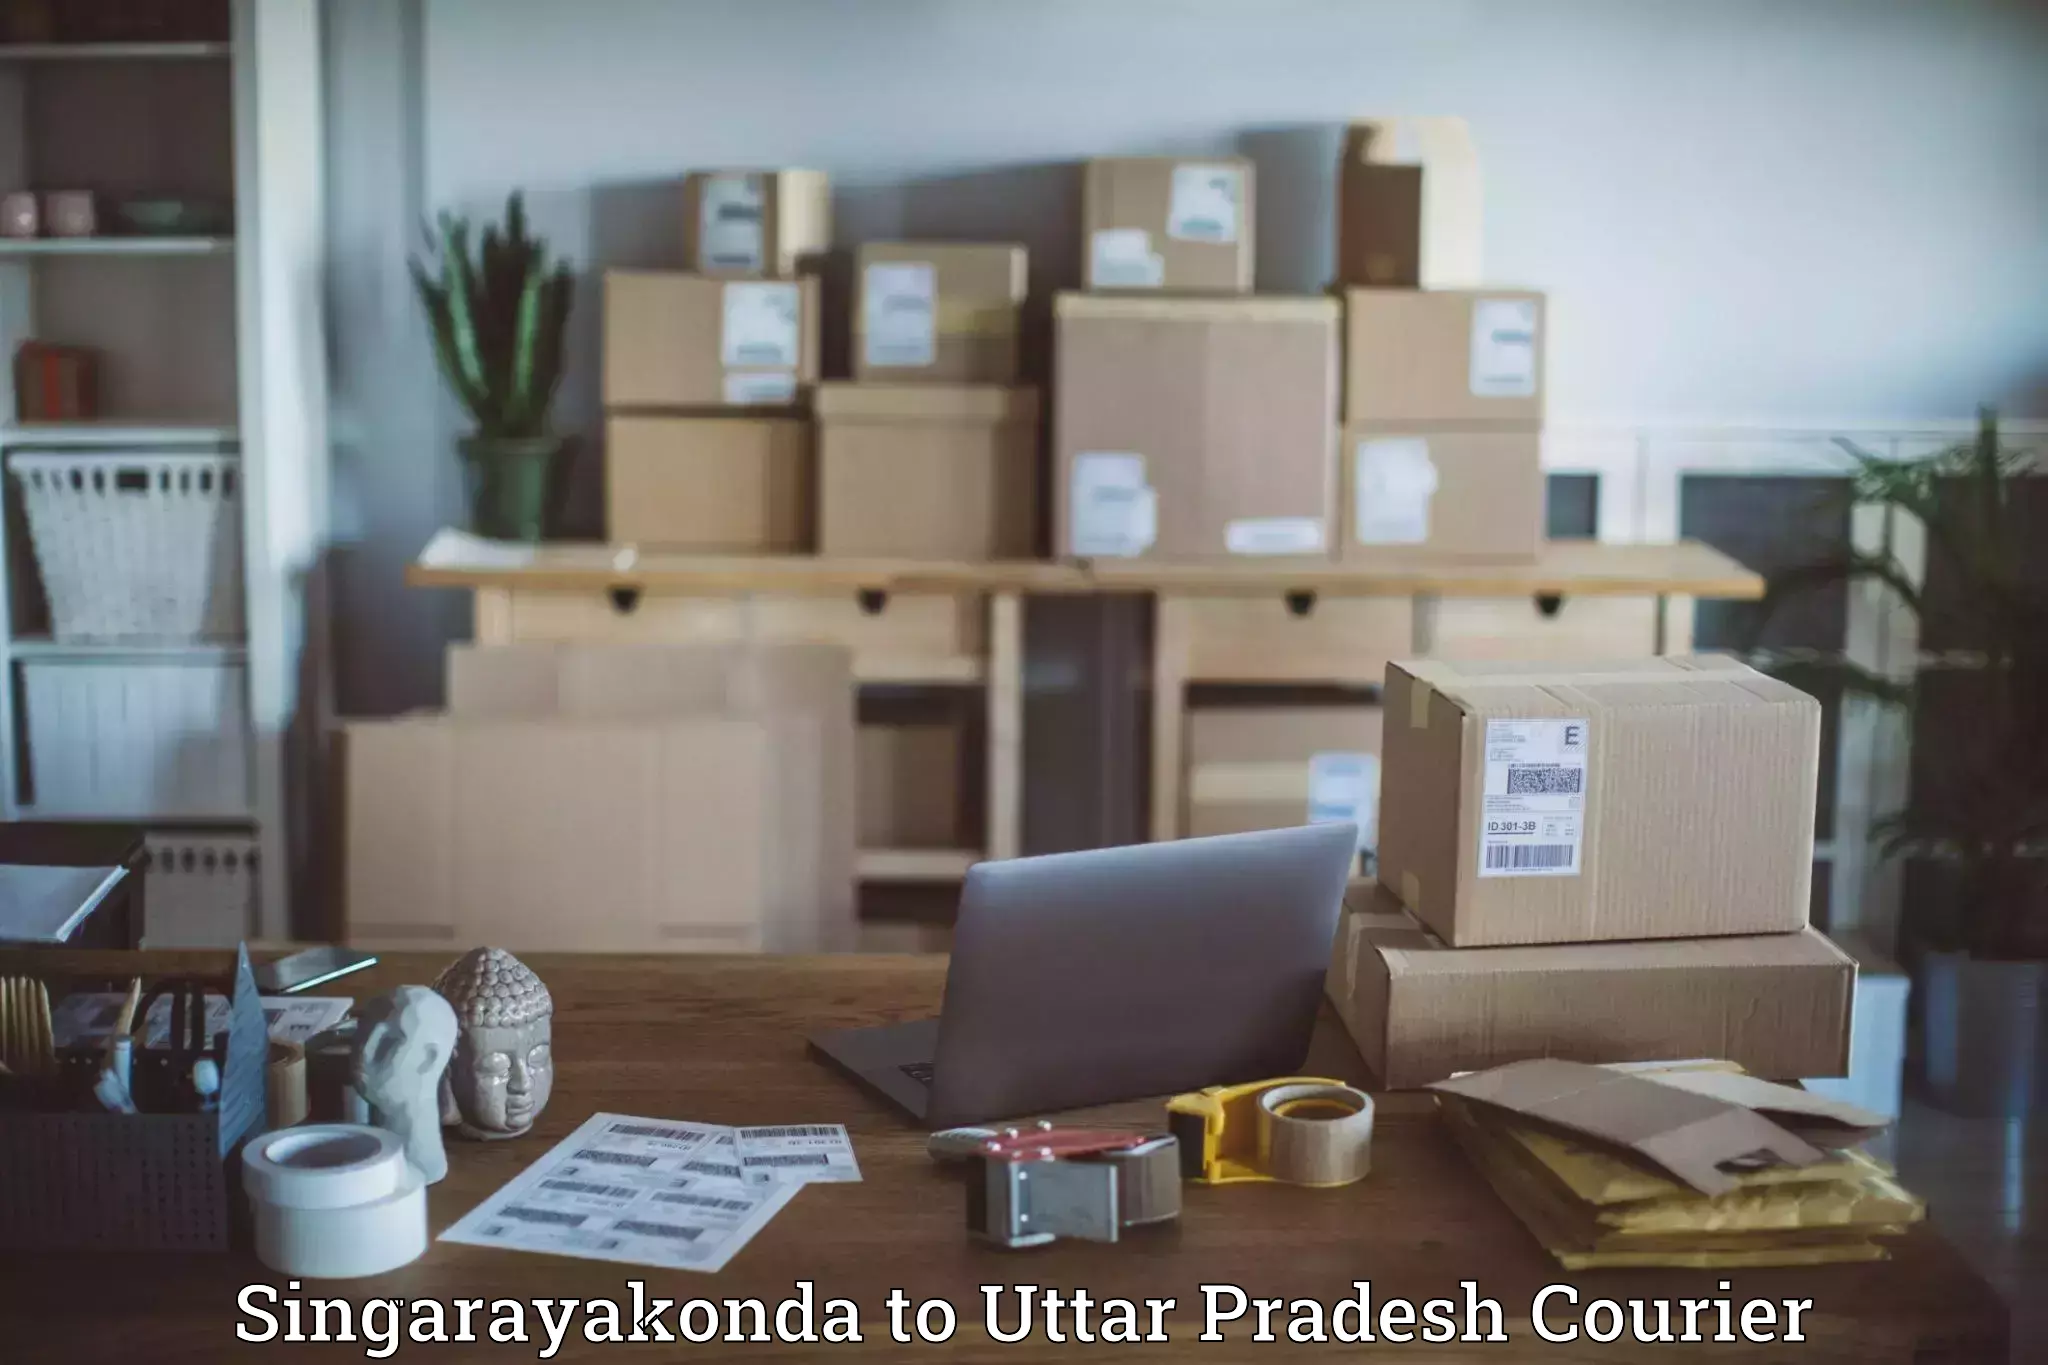 On-time delivery services Singarayakonda to Sultanpur Avadh